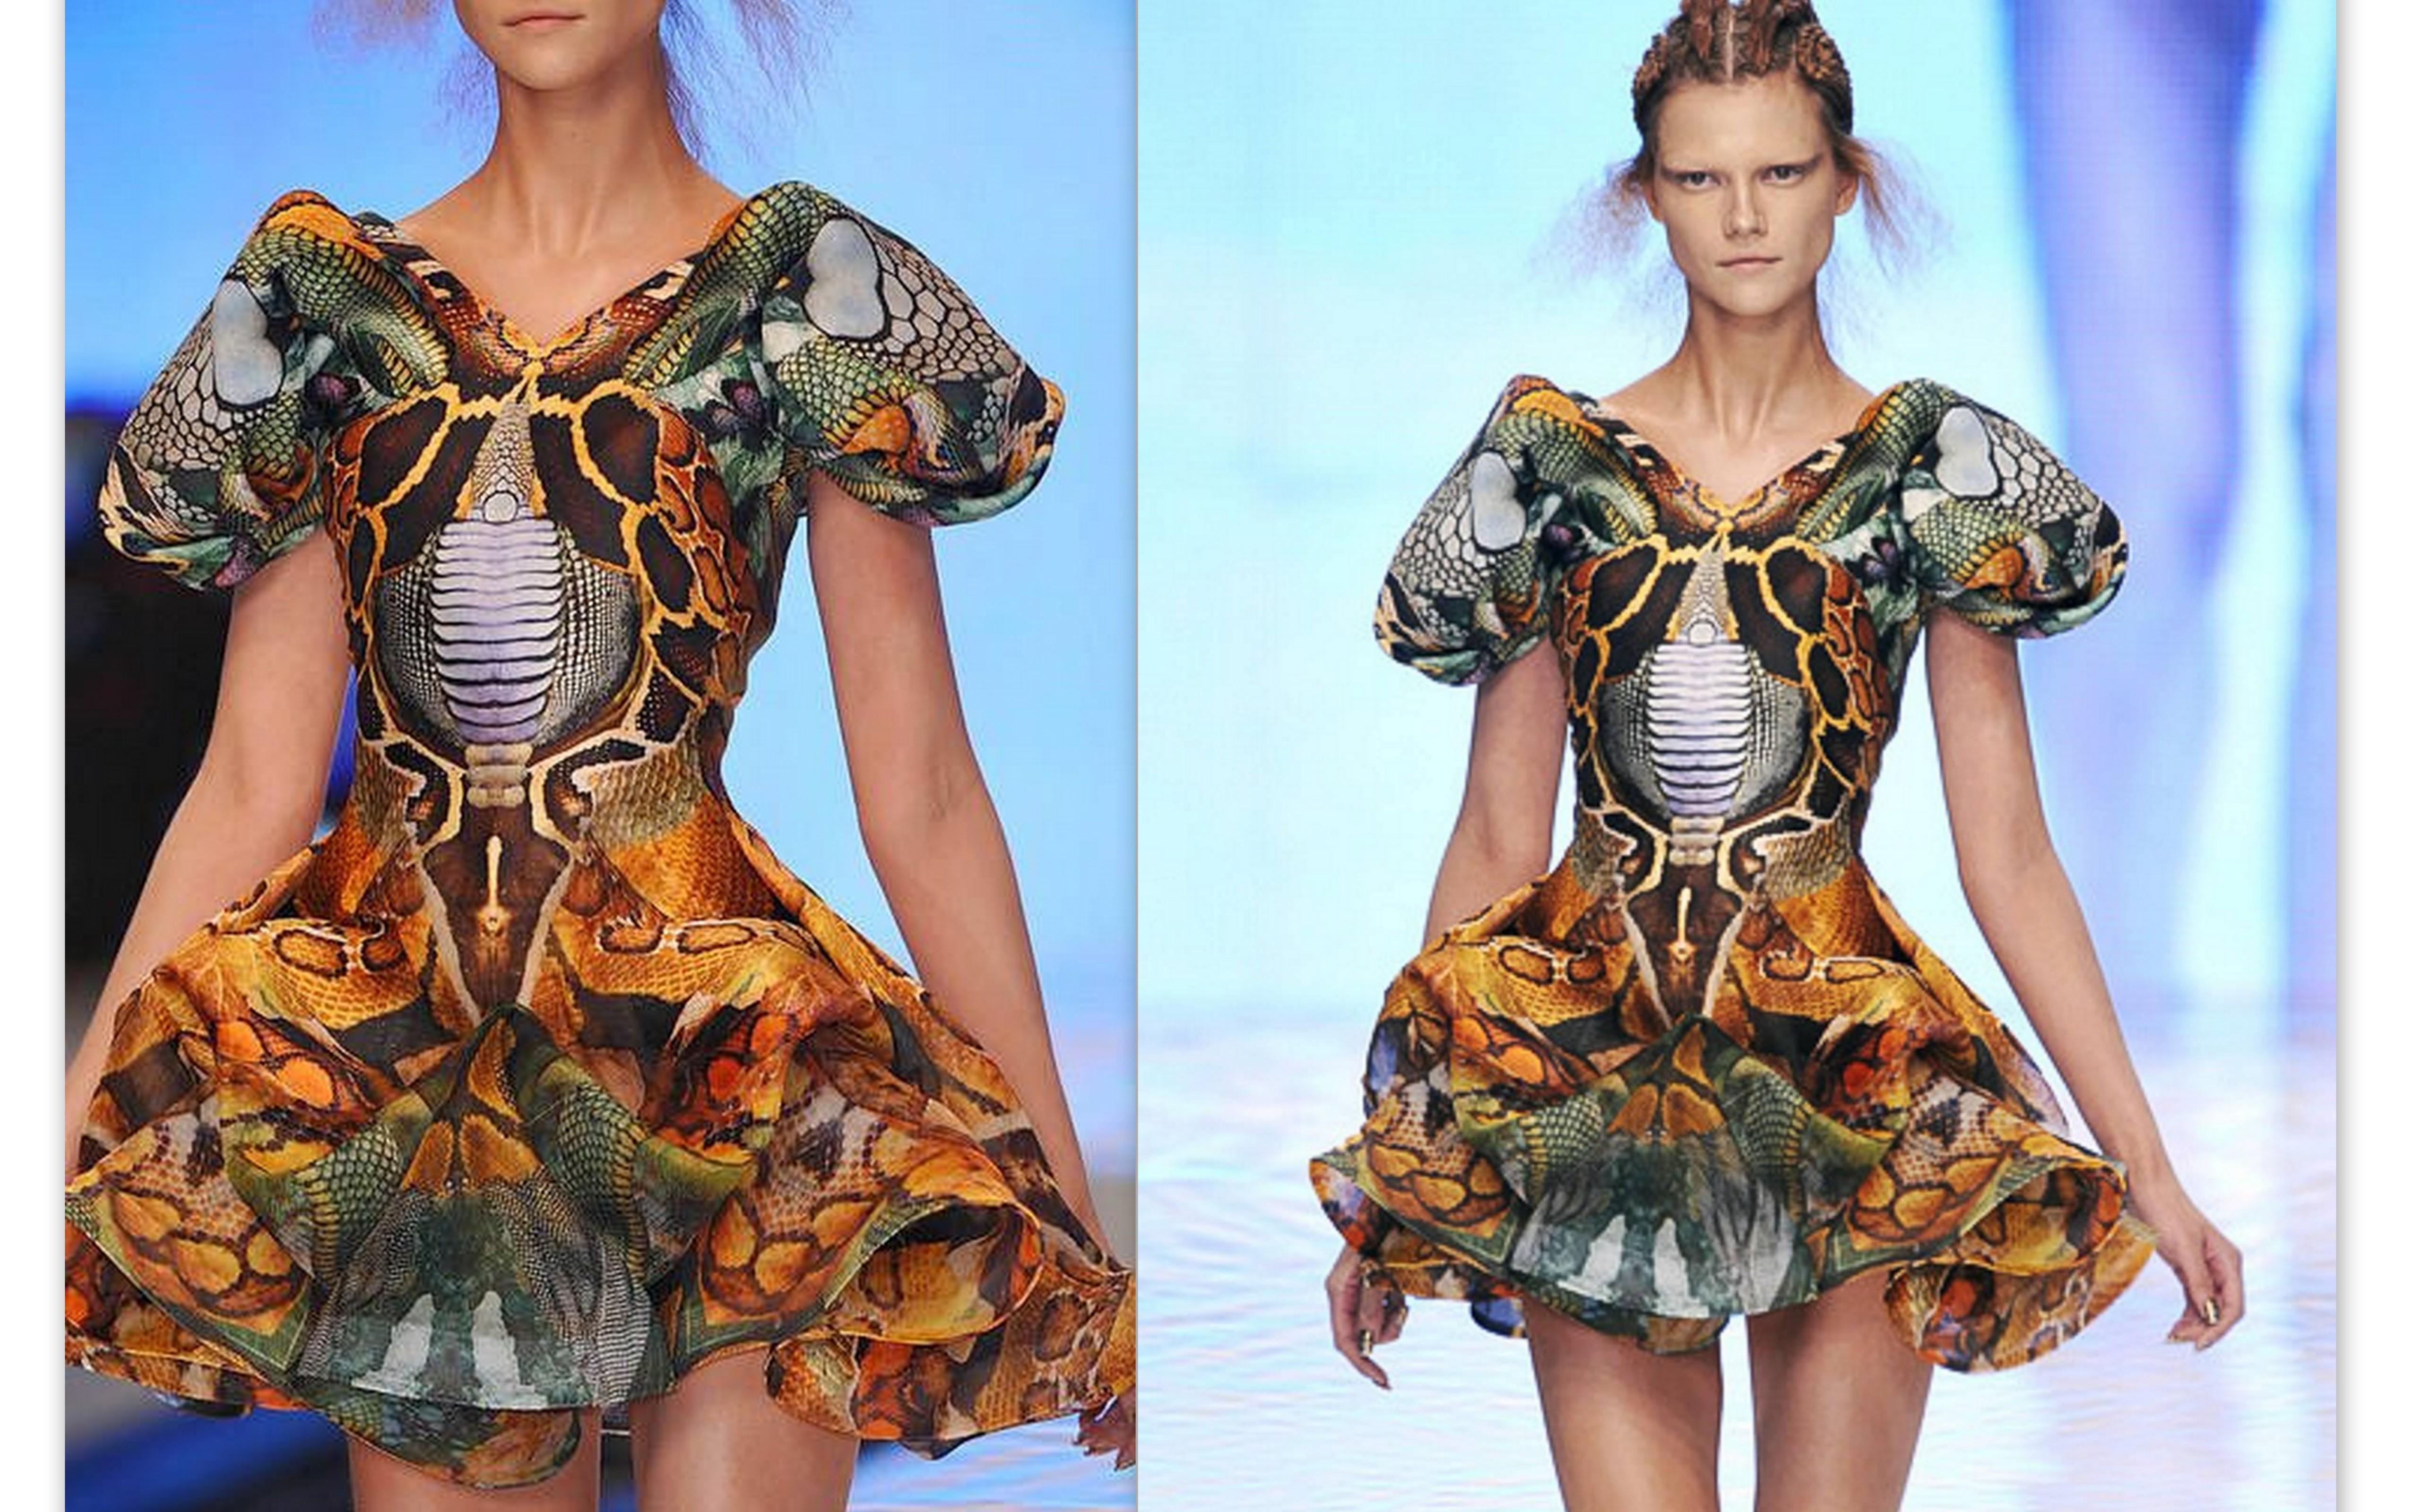 Alexander McQueen 'Plato's Atlantis' collection snakeskin printed organza dress
Spring-Summer, 2010  with python-like photo-collage print in brilliant colors, internal flesh colored boned corset-like bodice

McQueen said of this collection that it